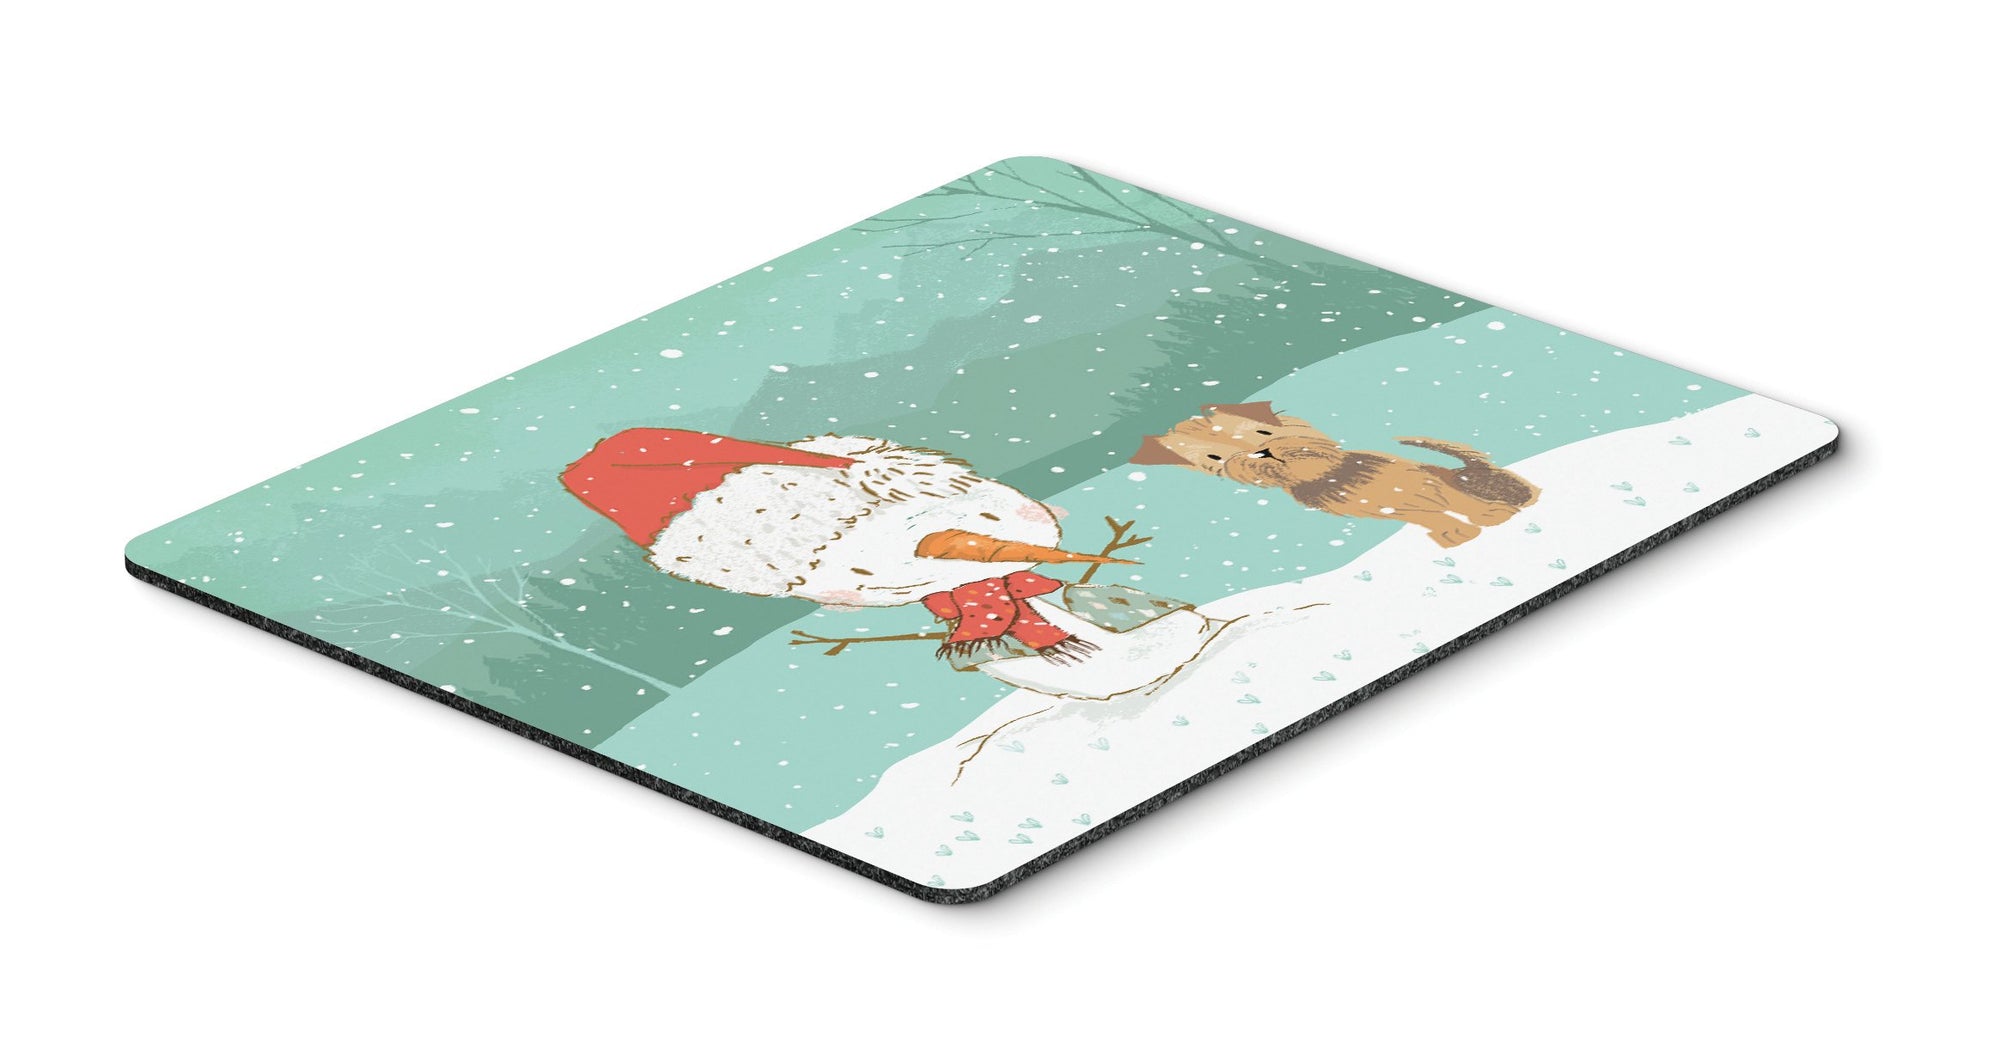 Yorkie Natural Ears Snowman Christmas Mouse Pad, Hot Pad or Trivet CK2099MP by Caroline's Treasures